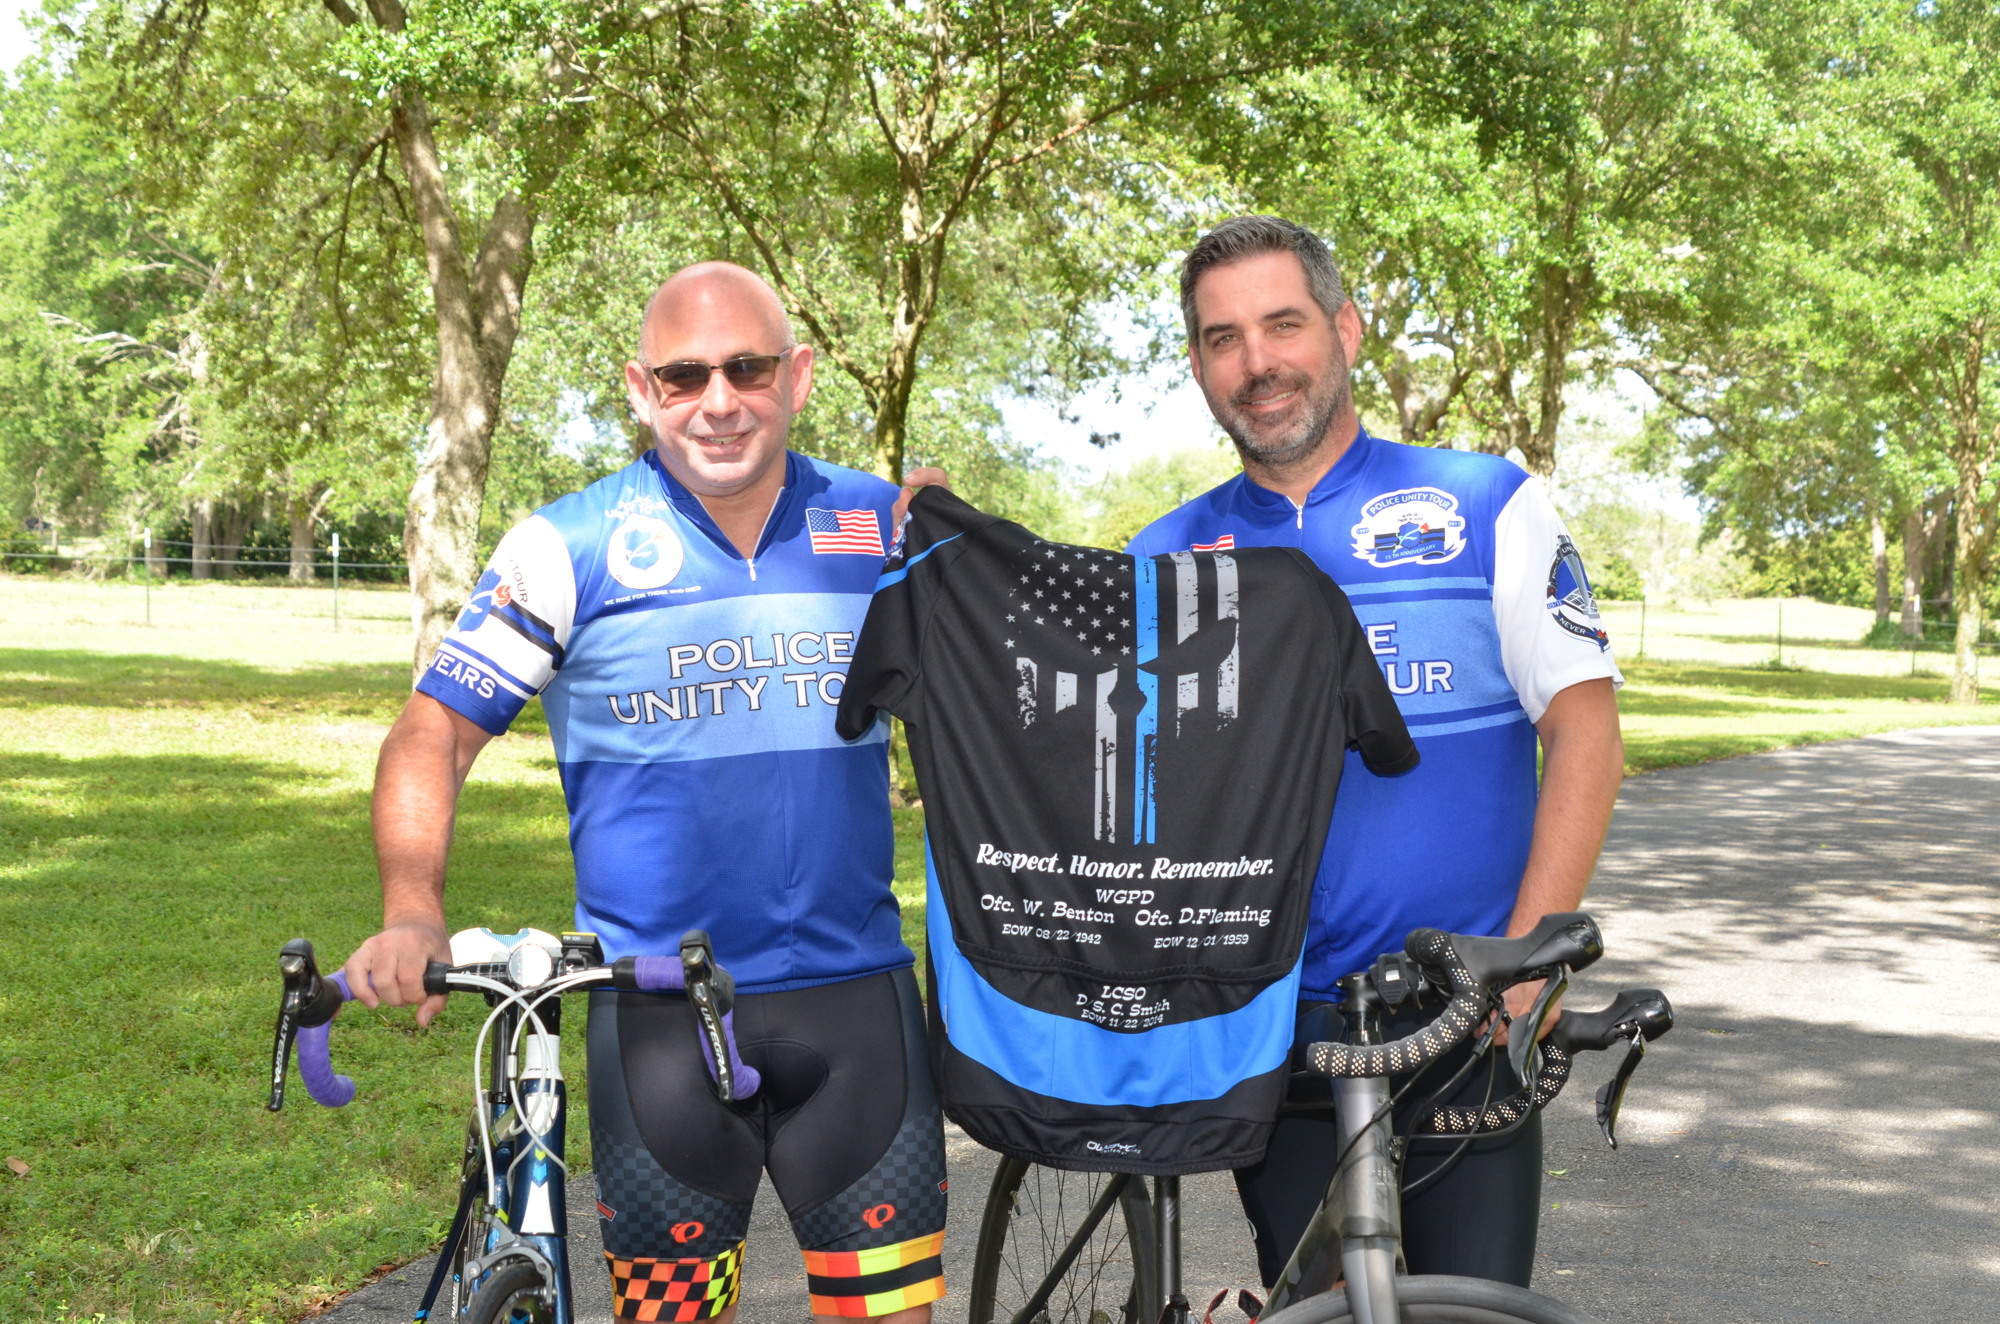 Andrew Raphael, left, and Joe Cassidy are two of the eight members of the Chapter VIII local team raising funds and riding their bikes 254 miles for the Police Unity Tour next month.